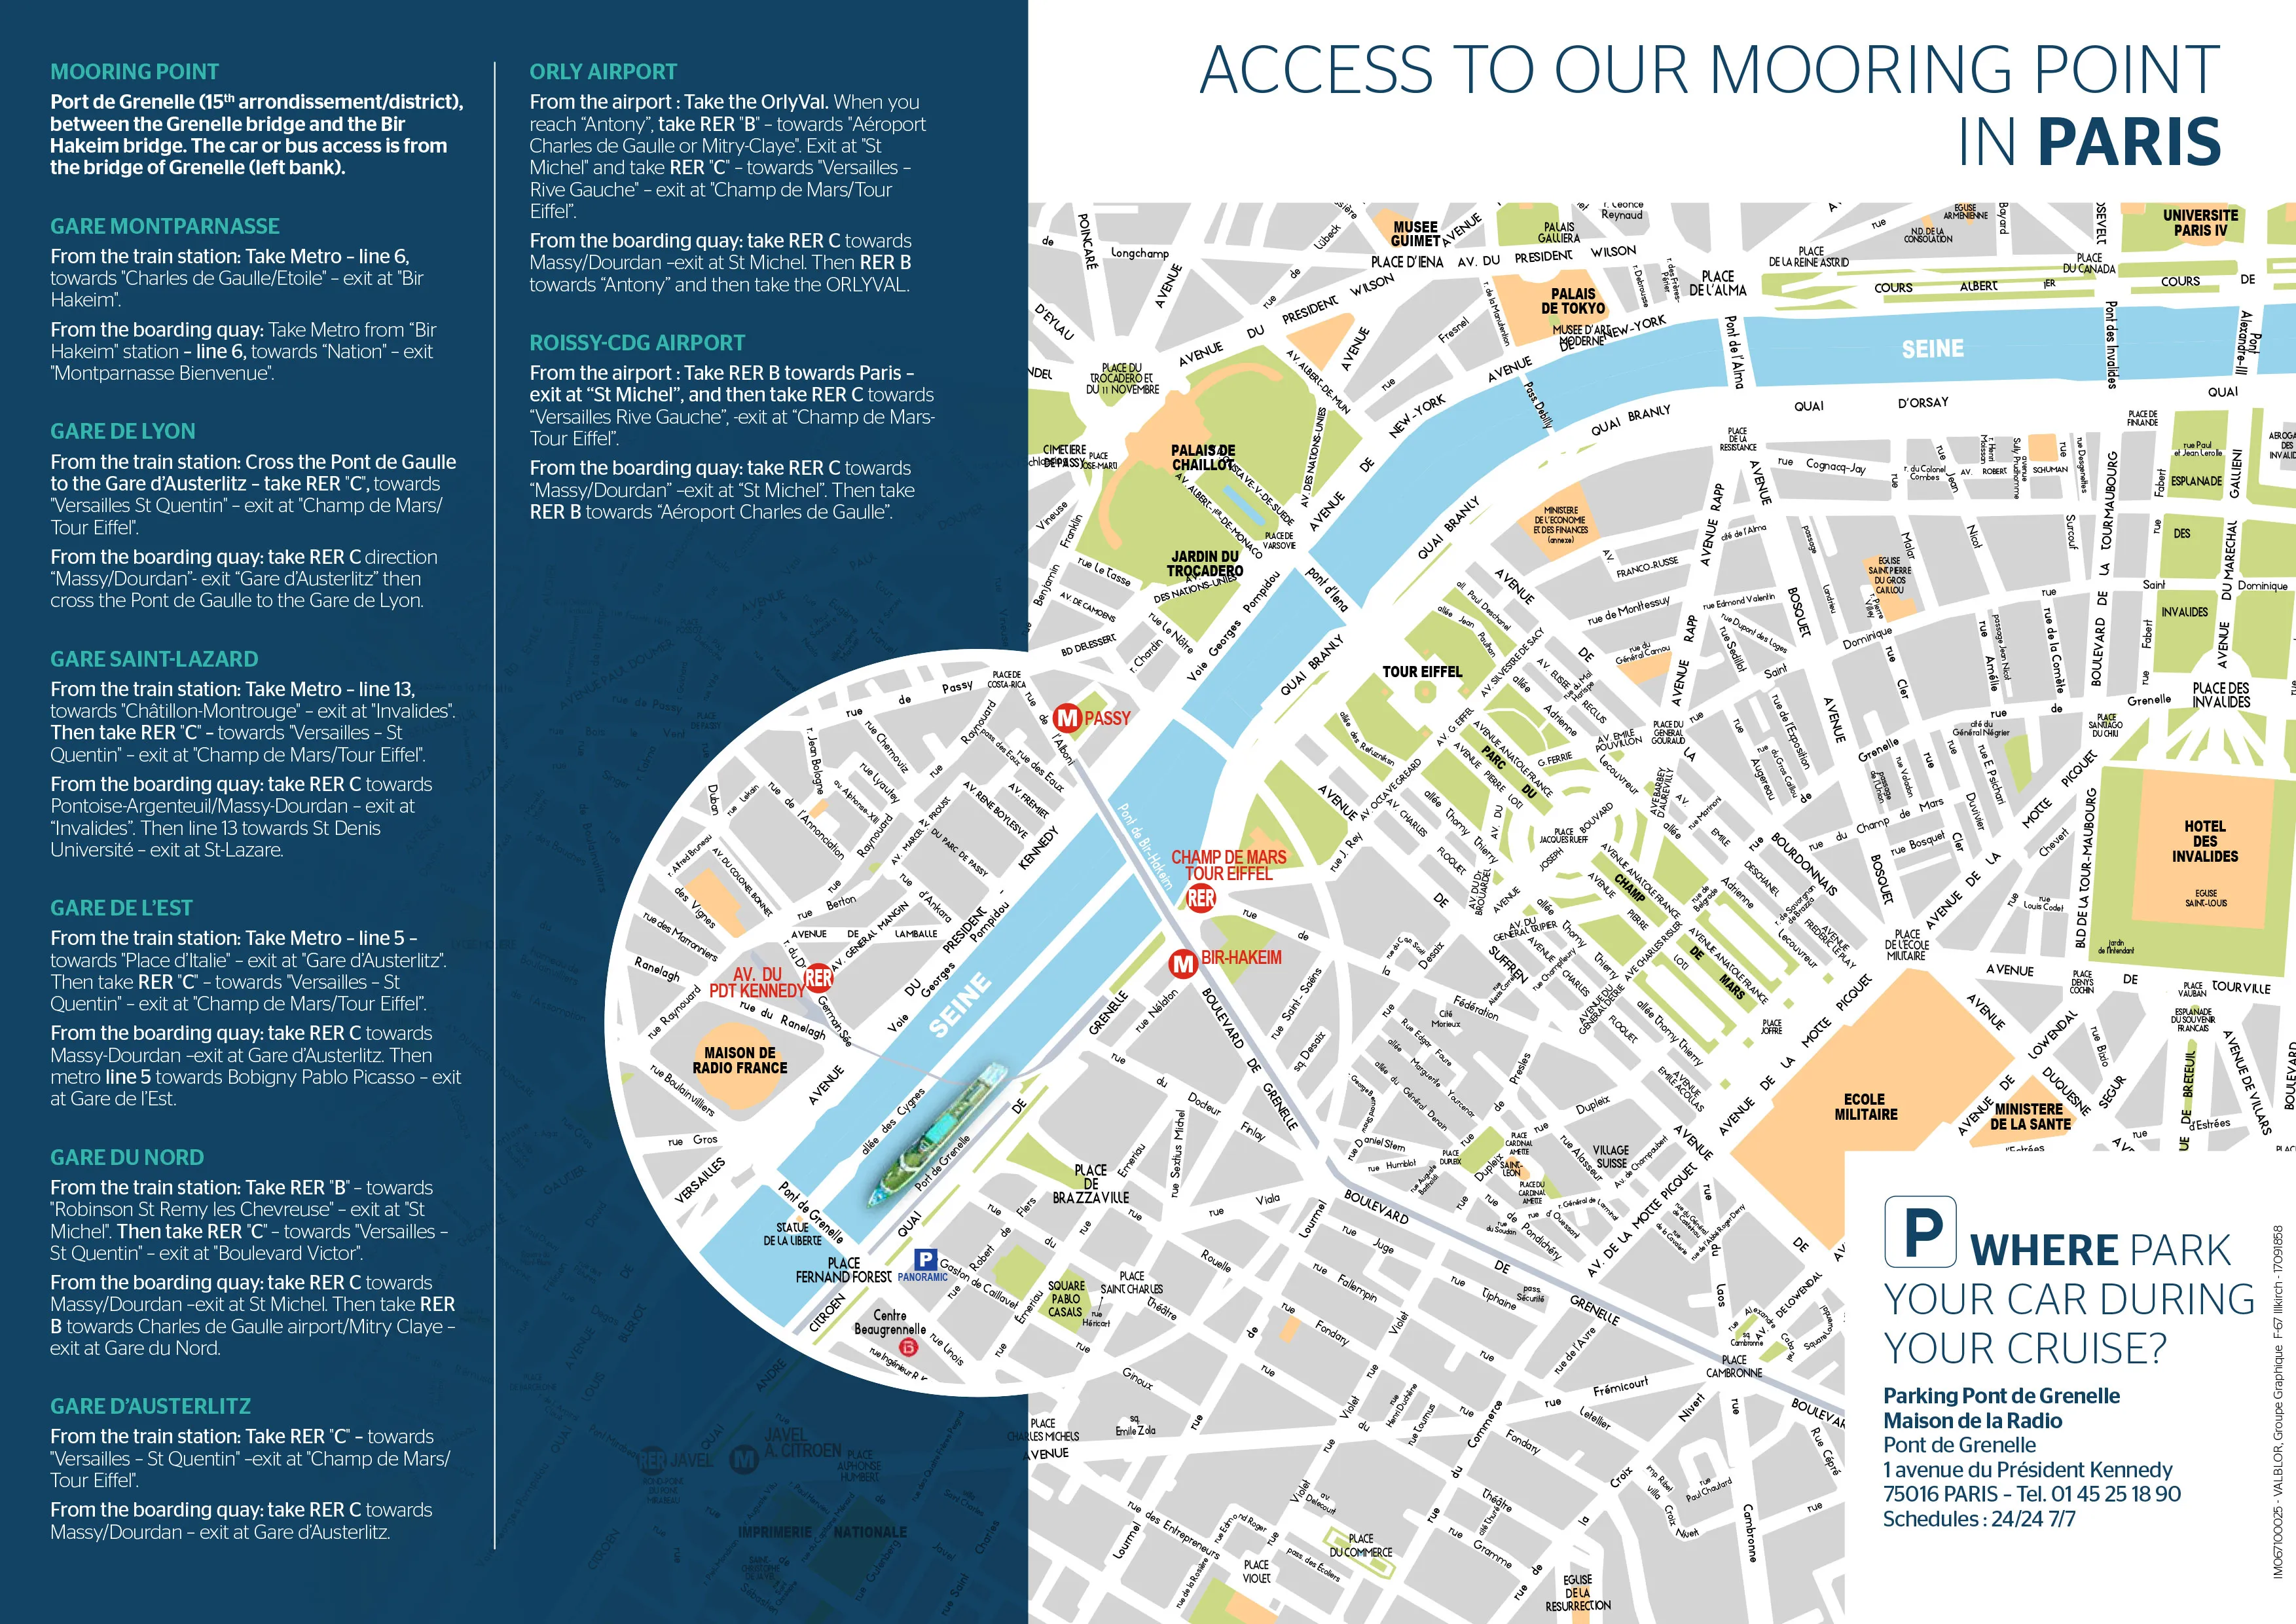 Download the map to reach the terminal to board your Seine Cruise in Paris.